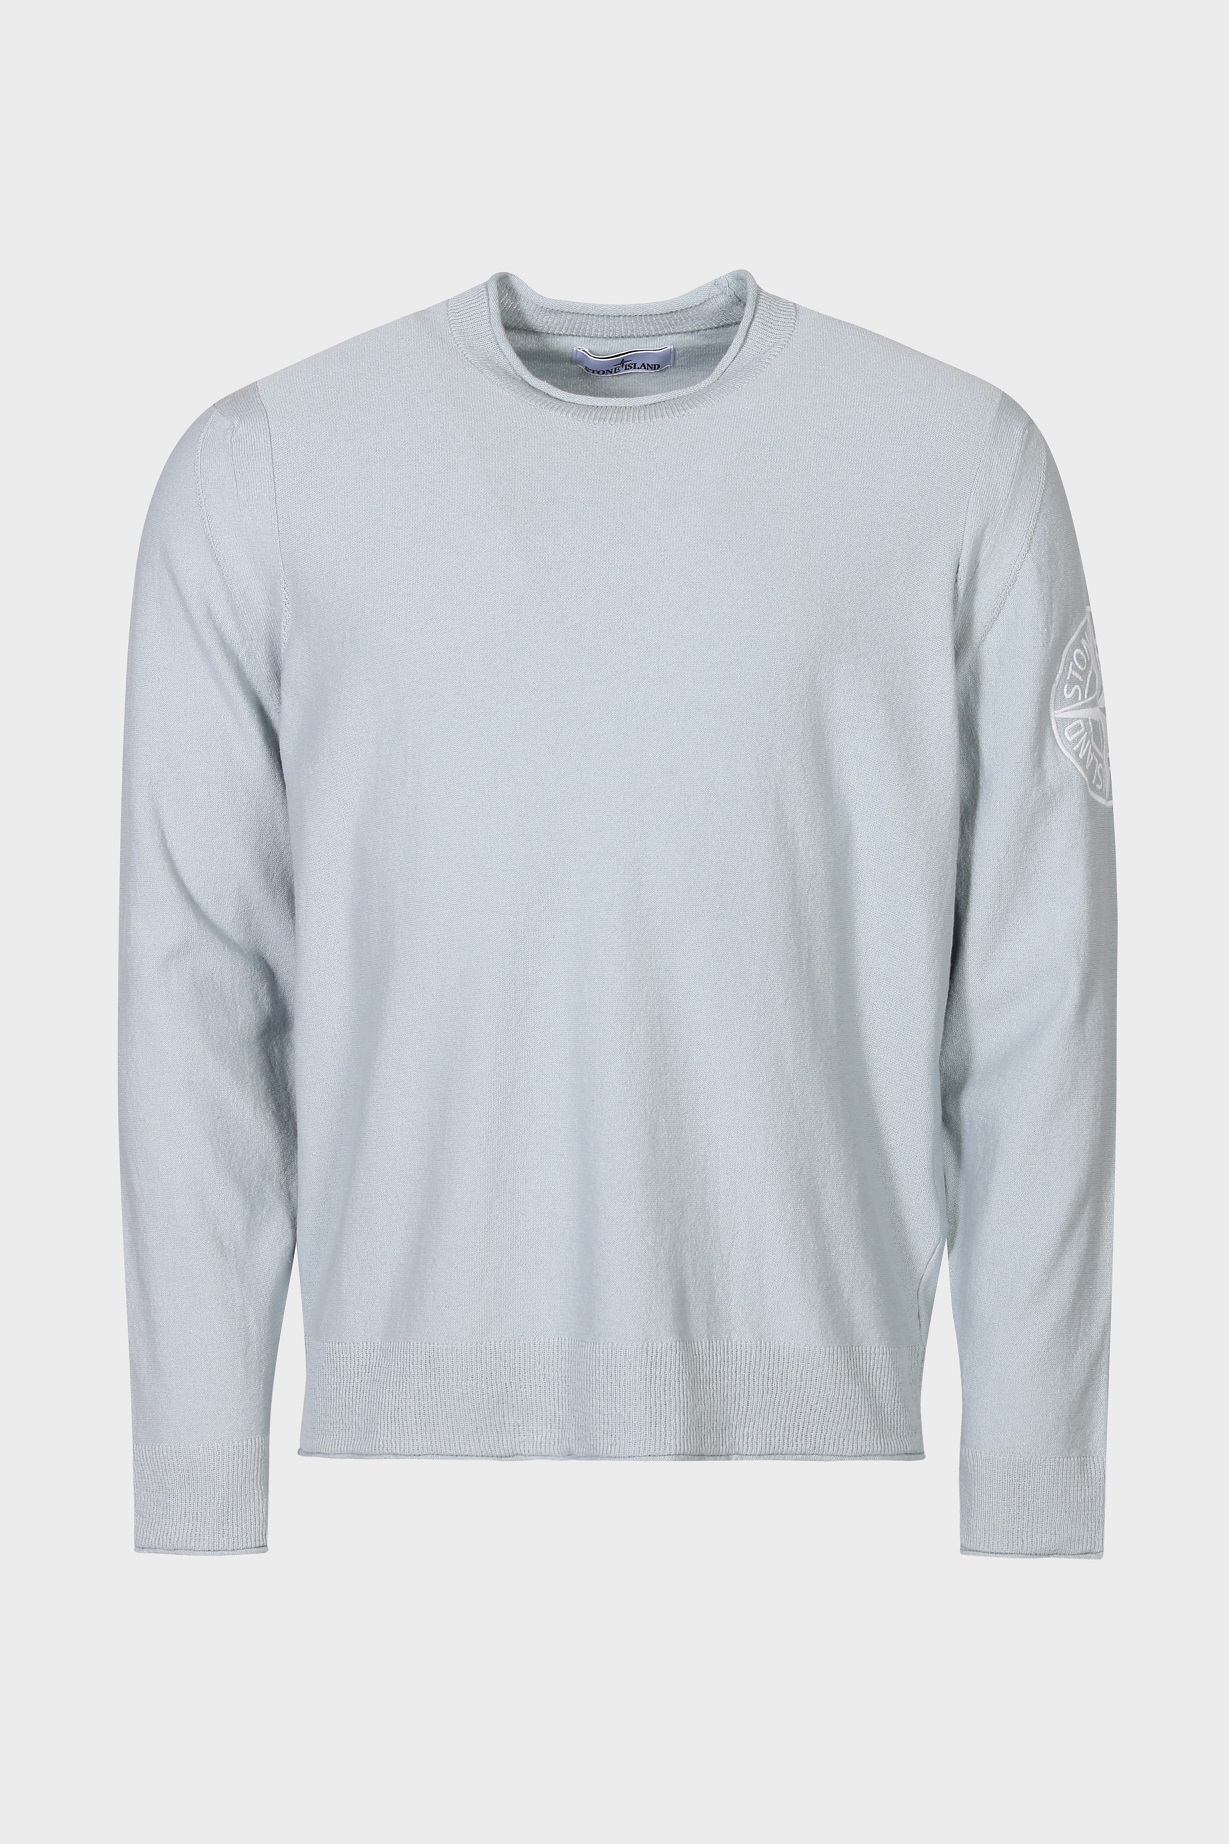 STONE ISLAND Cotton Knit Pullover in Sky Blue M